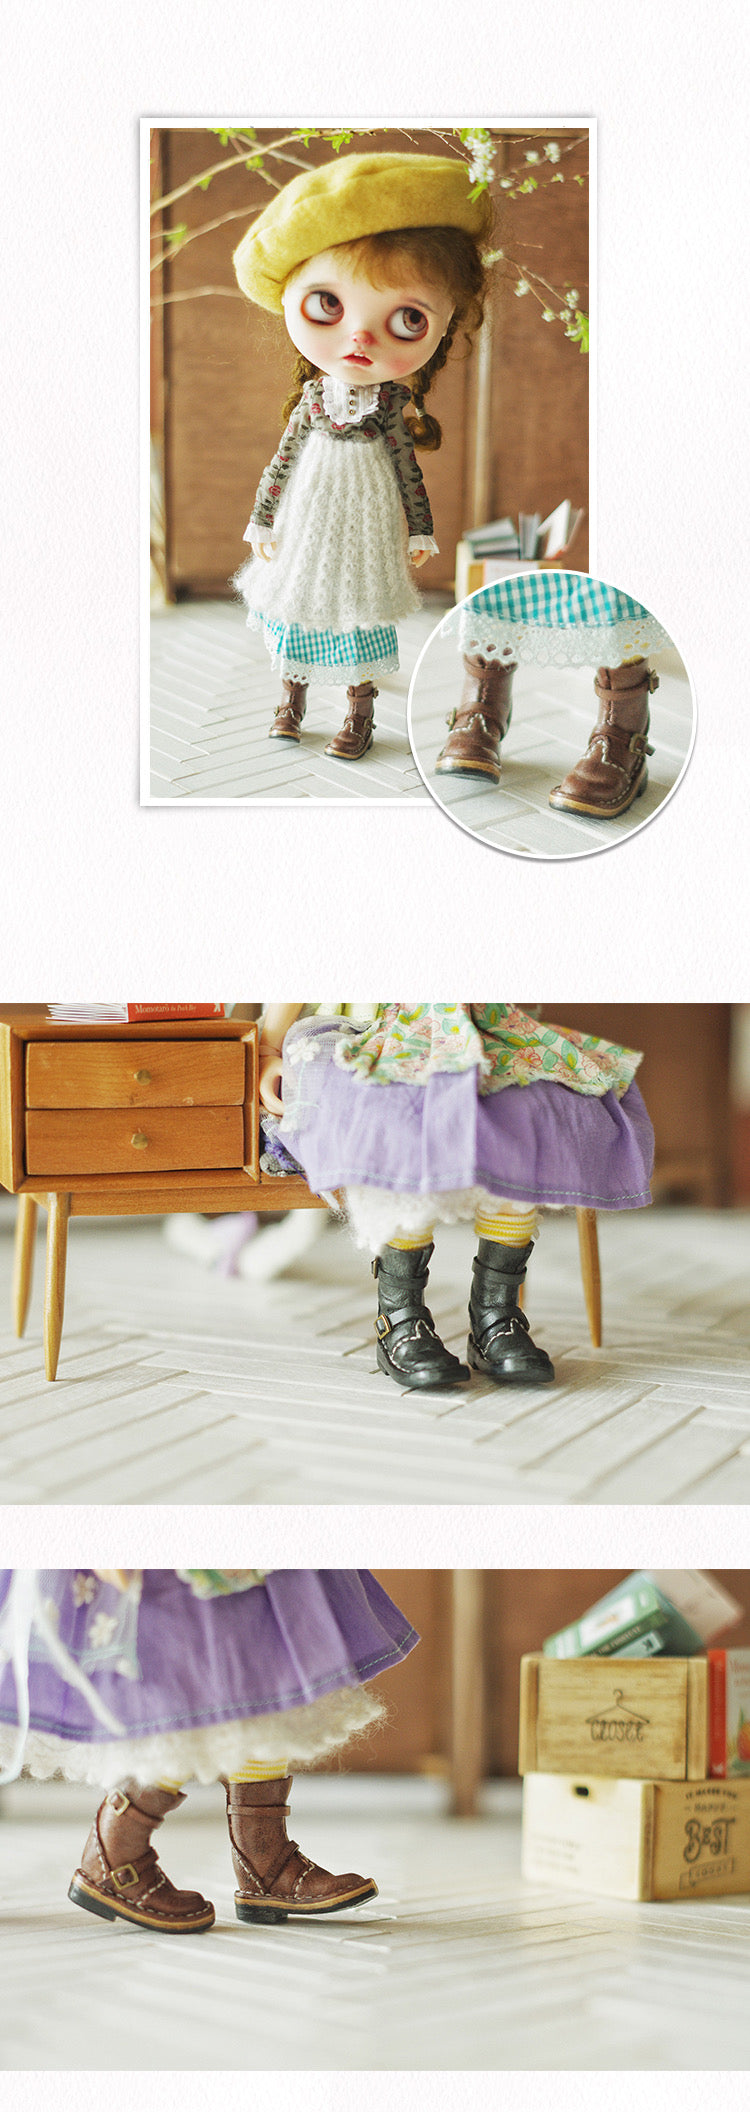 BJD Shoes Cute Short leather Boots for BLYTHE OB24 OB22 OZS Size Ball-jointed Doll